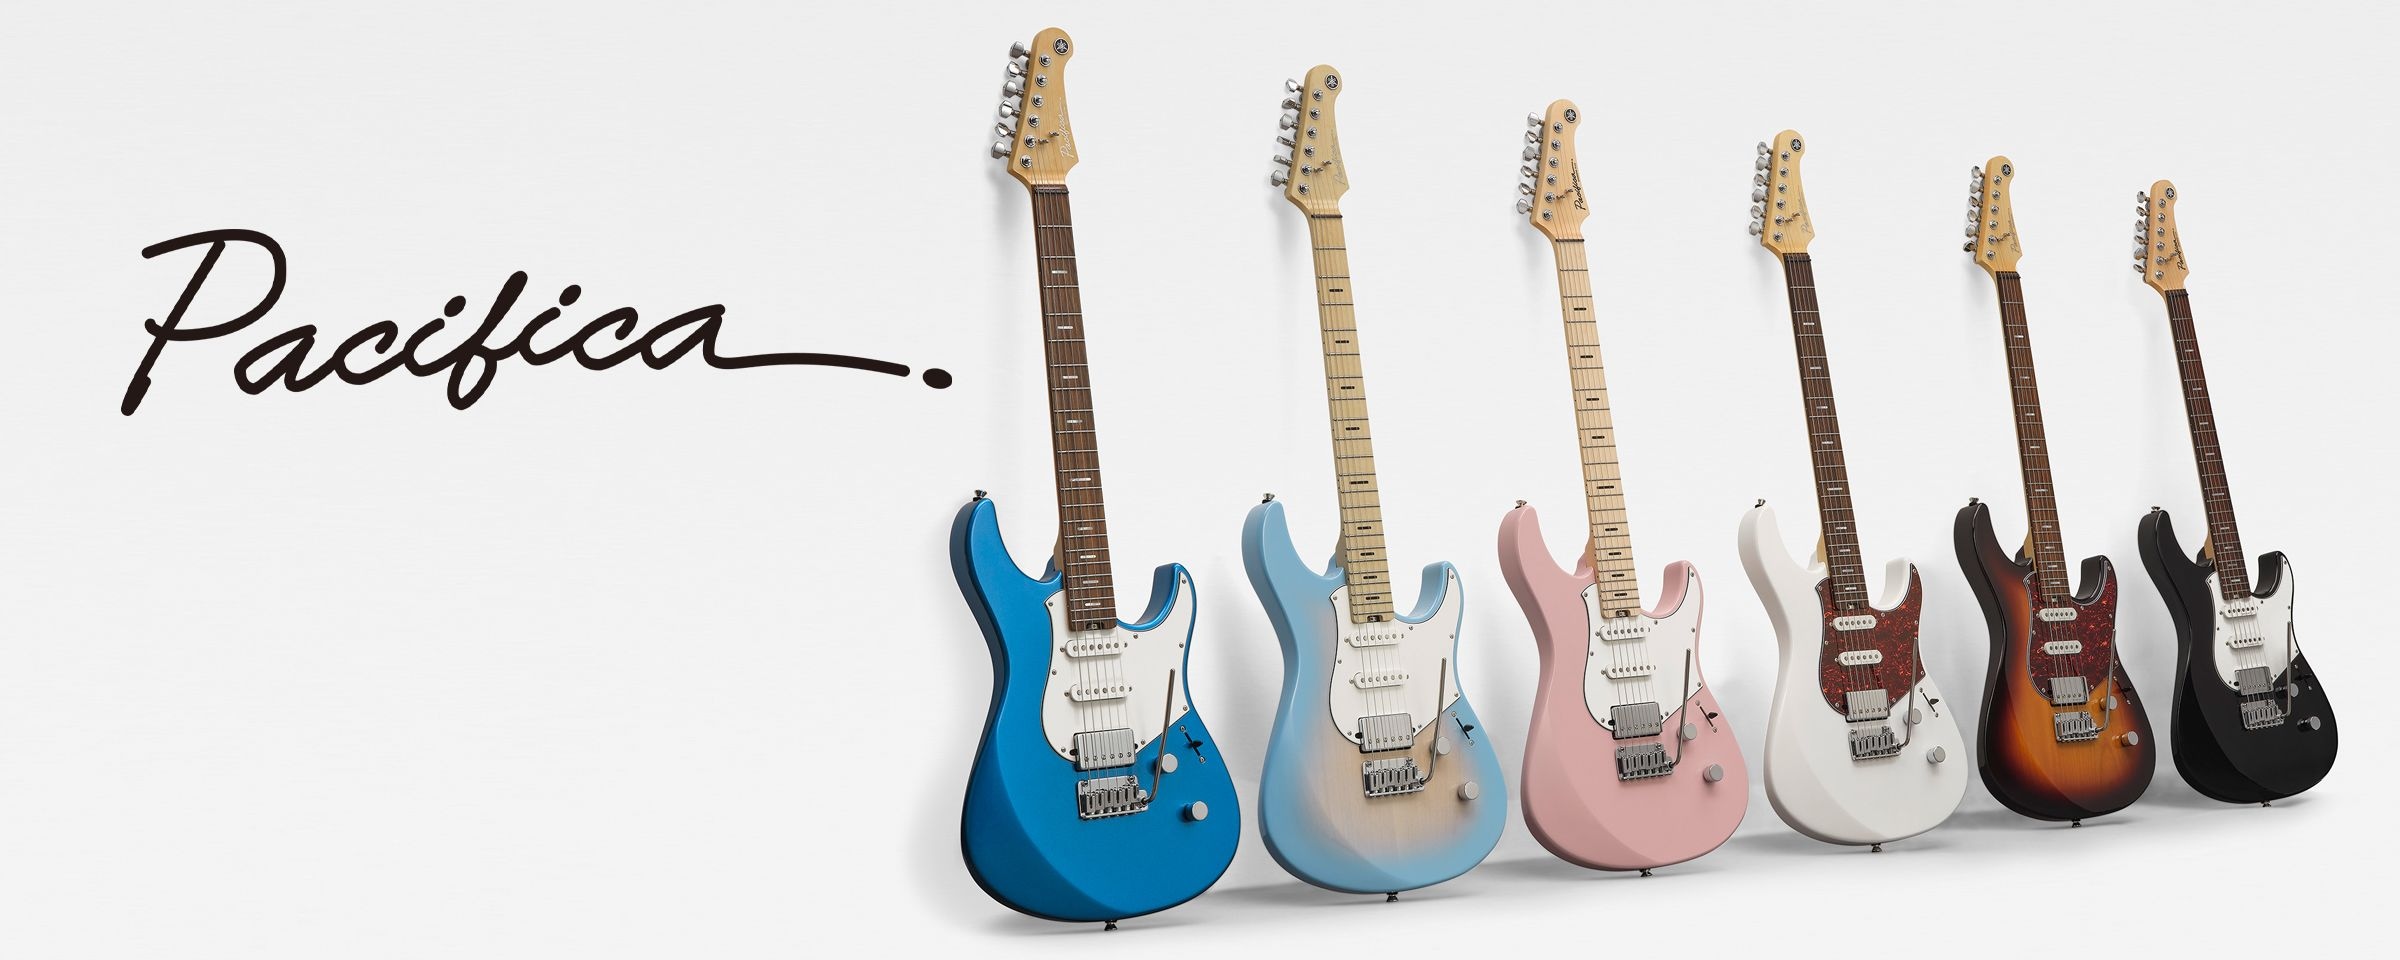 Family photo of Pacifica Professional and Standard Plus guitars leaning against a white background.